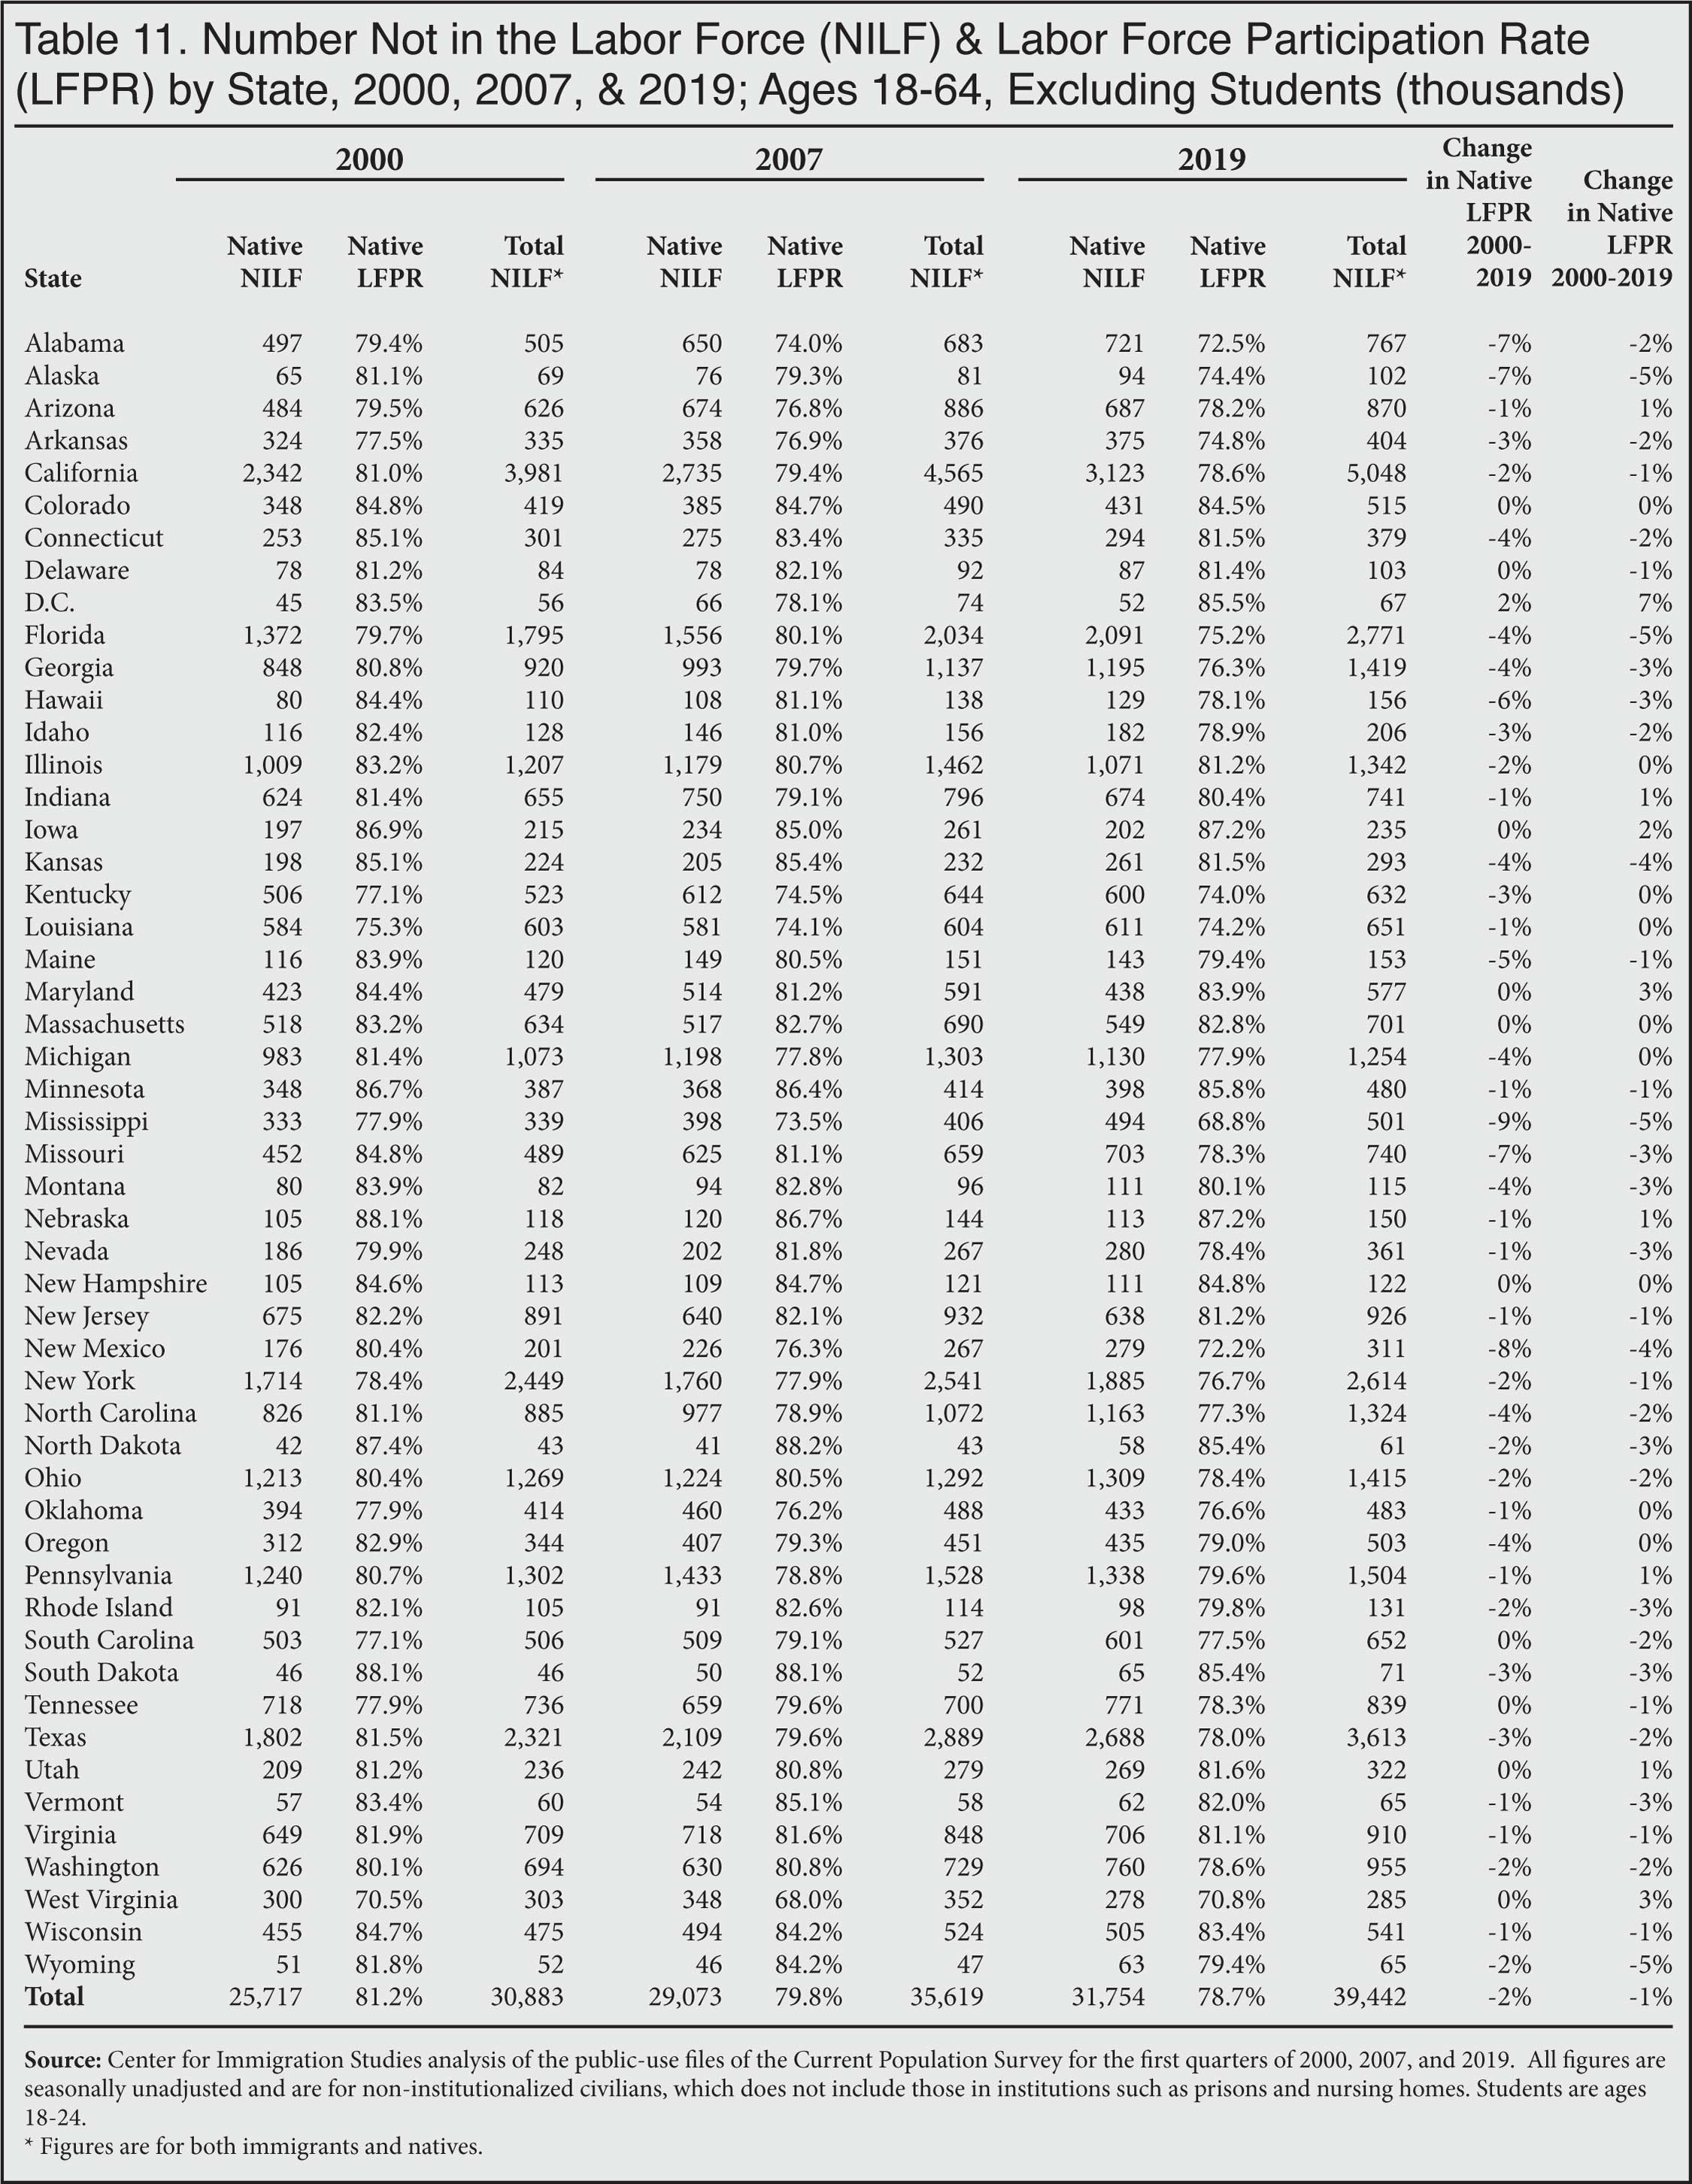 Table: Number not in the Labor Force and Labor Force Participation Rate by State, 2000, 2007, 2019 - Excluding Students